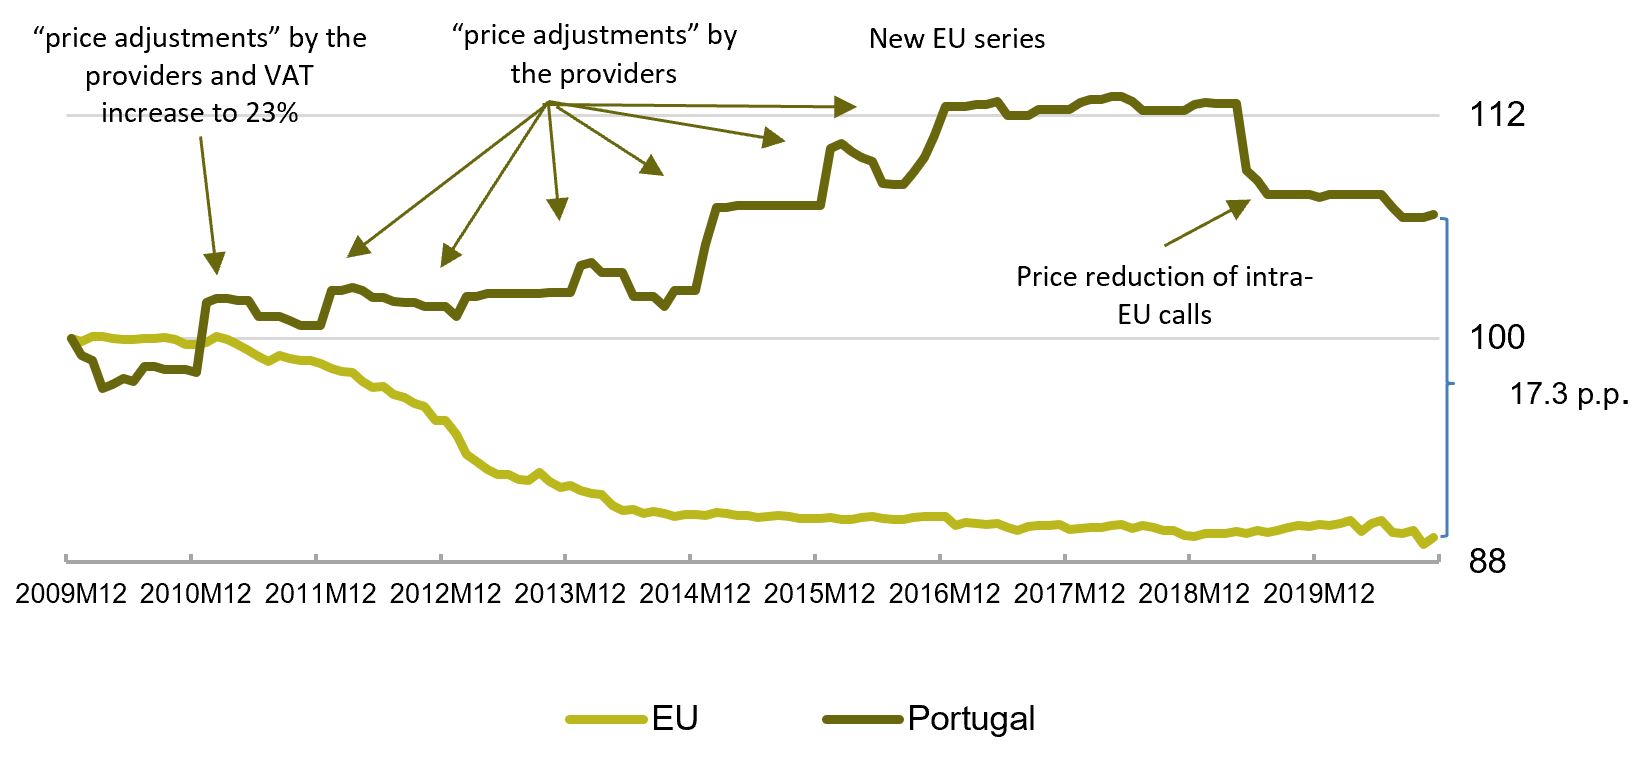 The differences between the evolution of the telecommunications prices in Portugal and in the EU was primarily due to the ''price adjustments'' implemented by the providers during various years, particularly in the first months of each year.